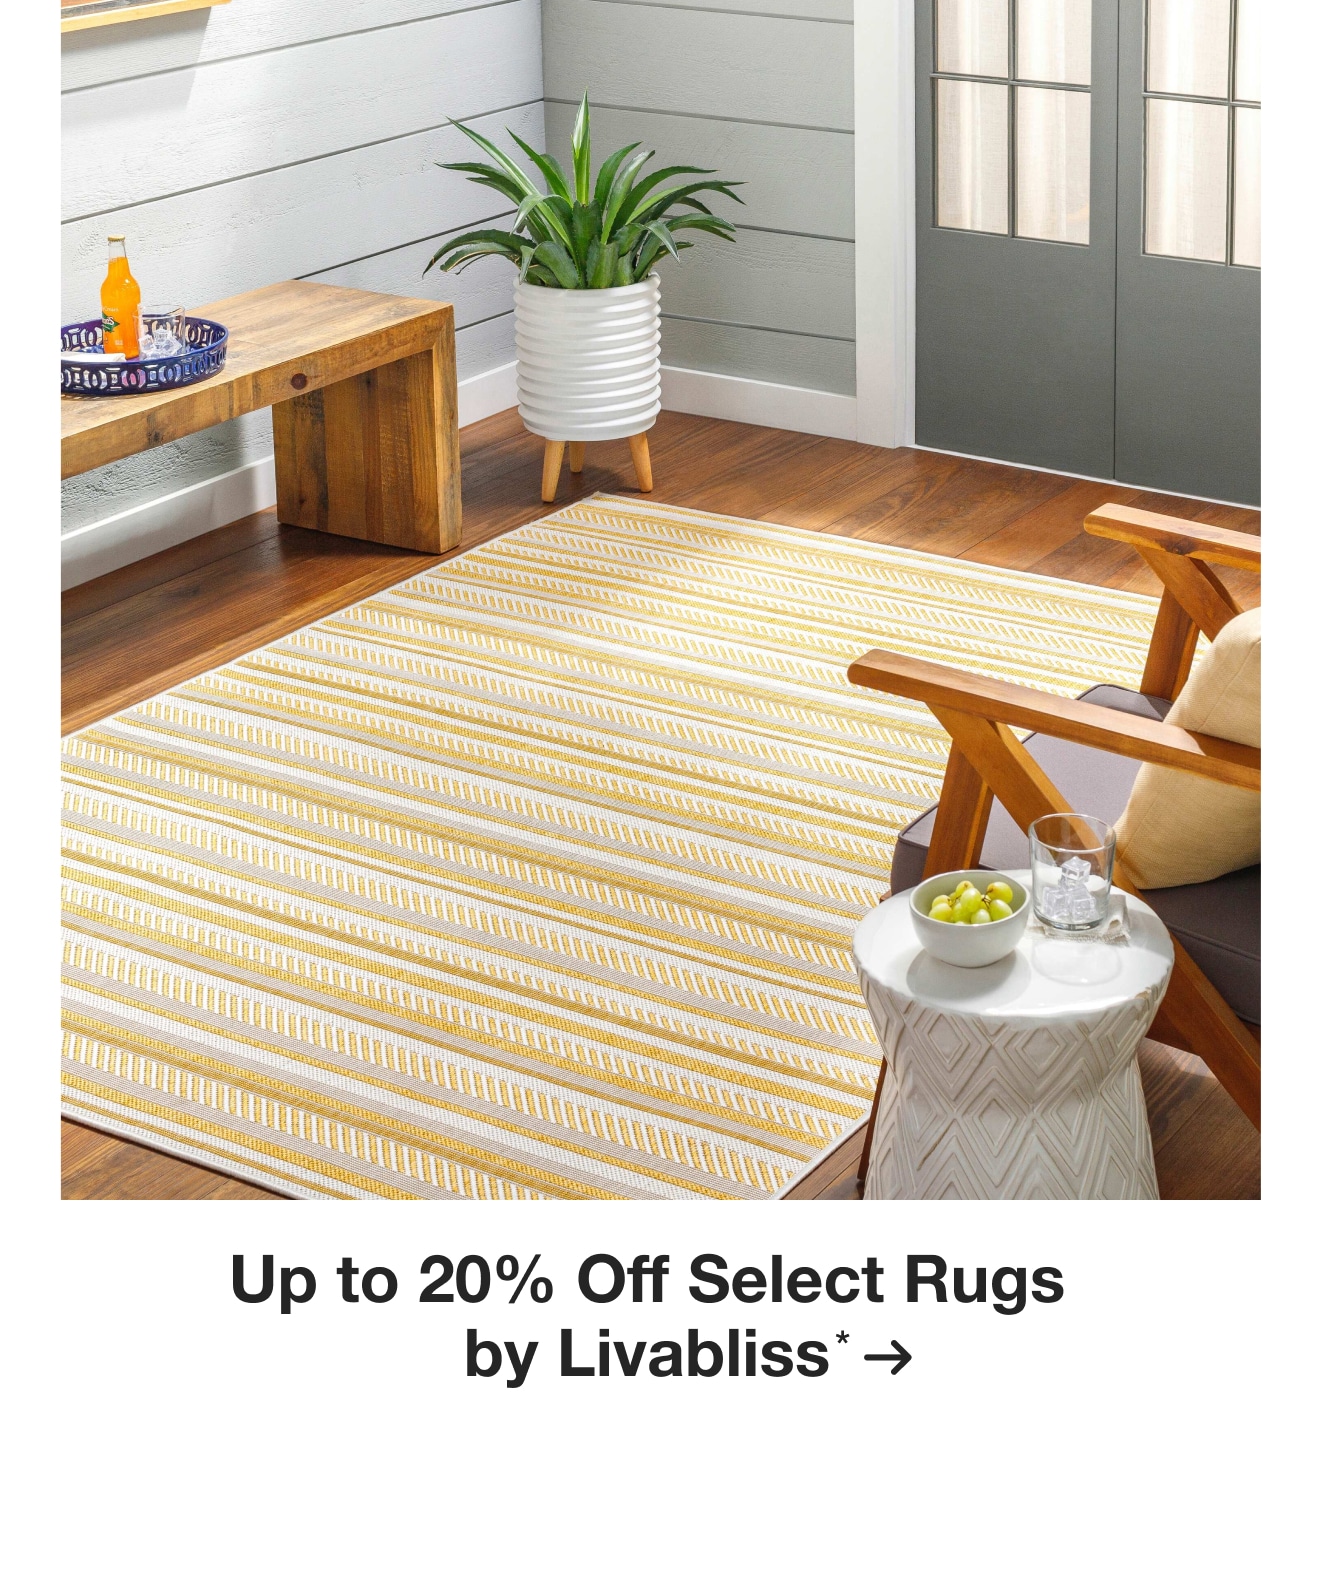 Up to 20% Off Select Rugs by Livabliss*